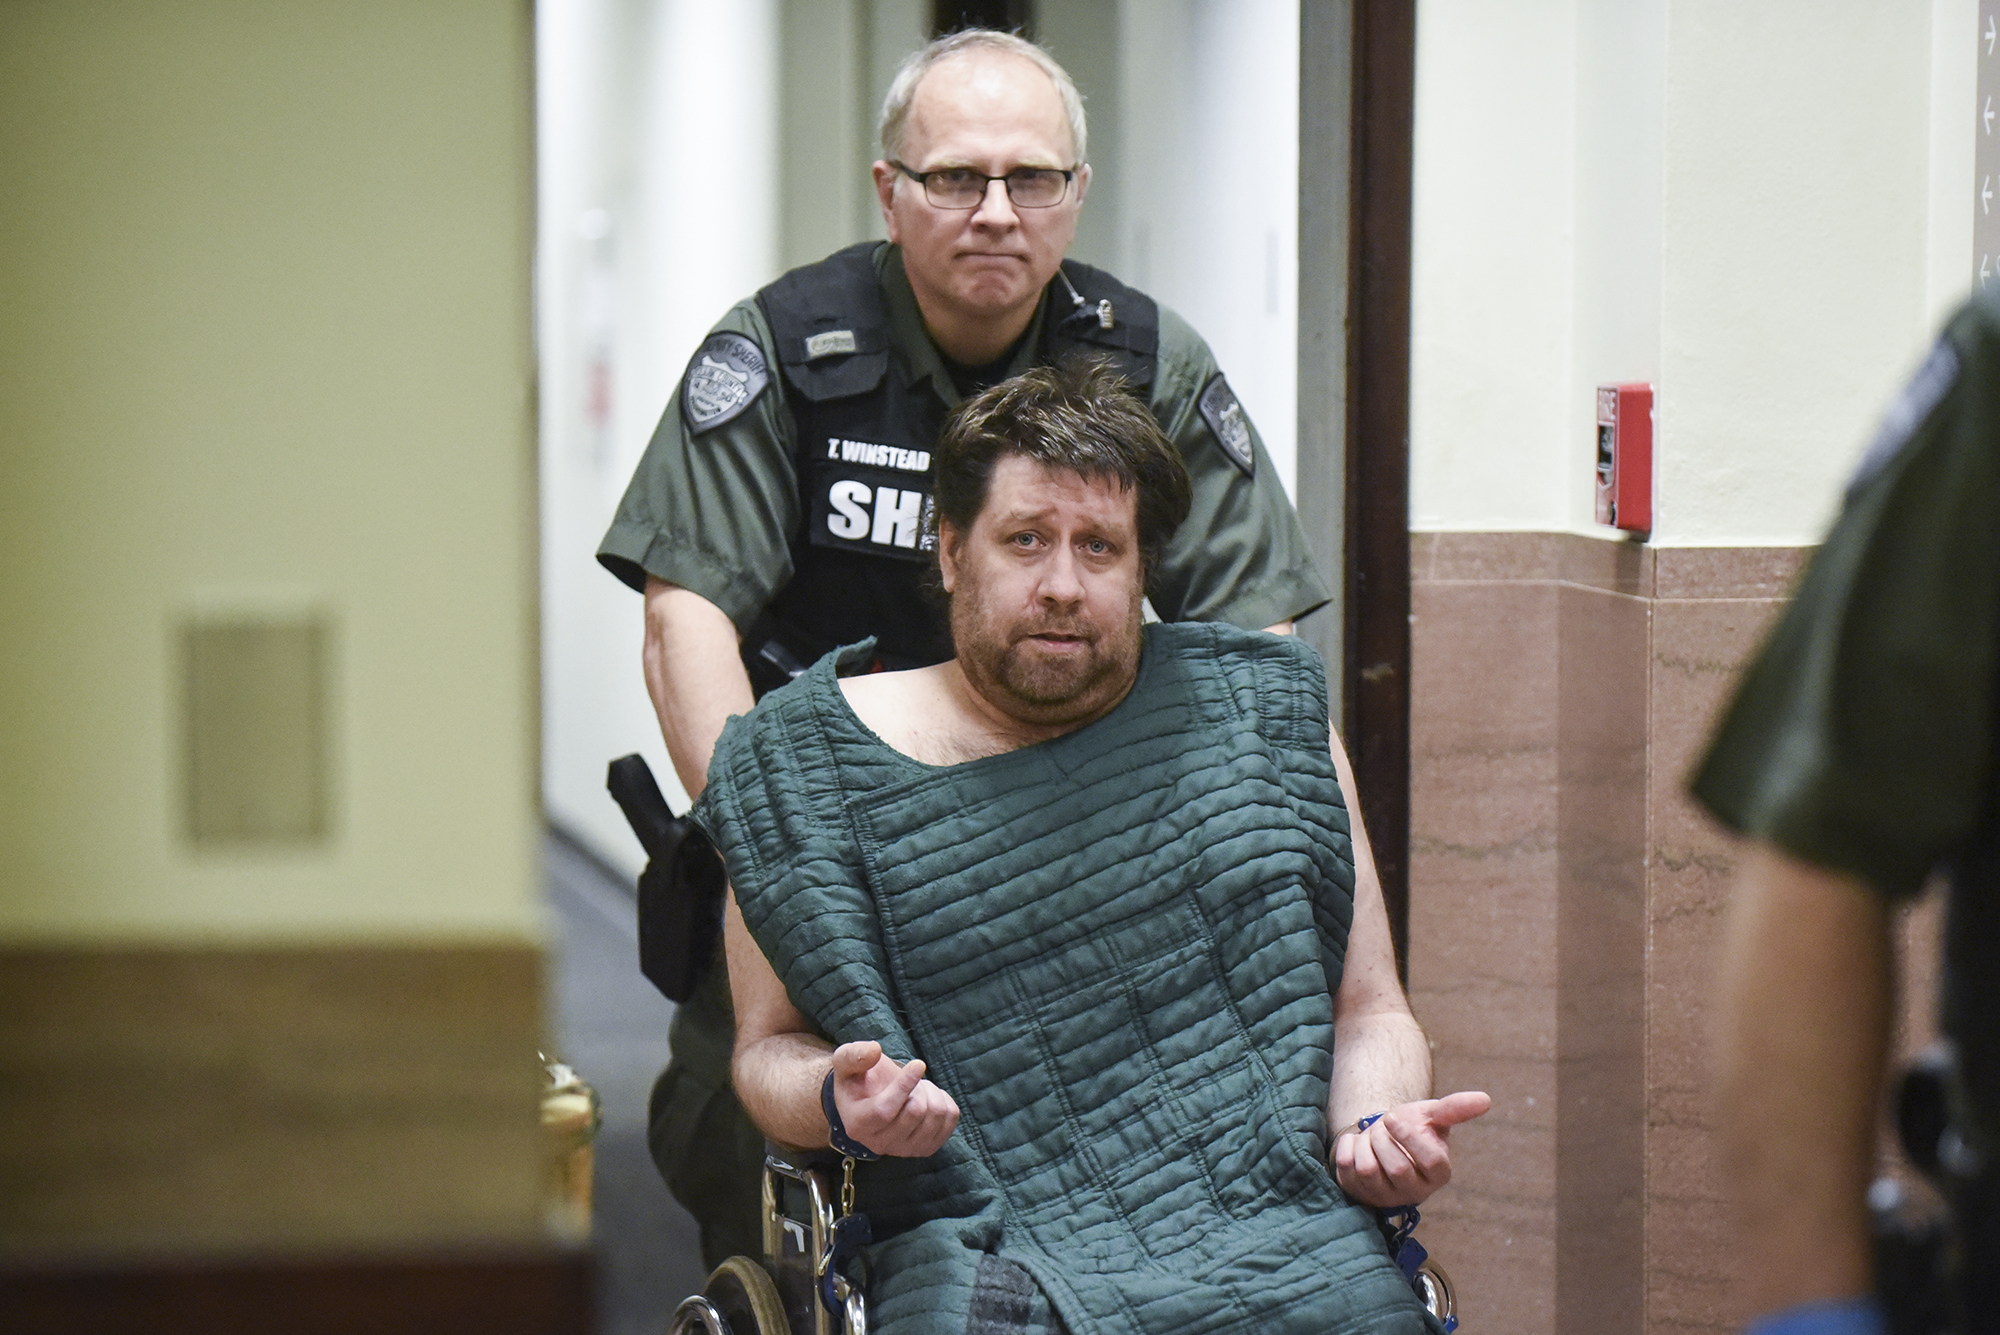 Kenneth Jay Moore, who was arrested after a two-hour standoff Friday at a Vancouver home, is wheeled into Clark County Superior Court on Feb. 21, 2017, on suspicion of murder and assault after his mother's body was found inside the residence.